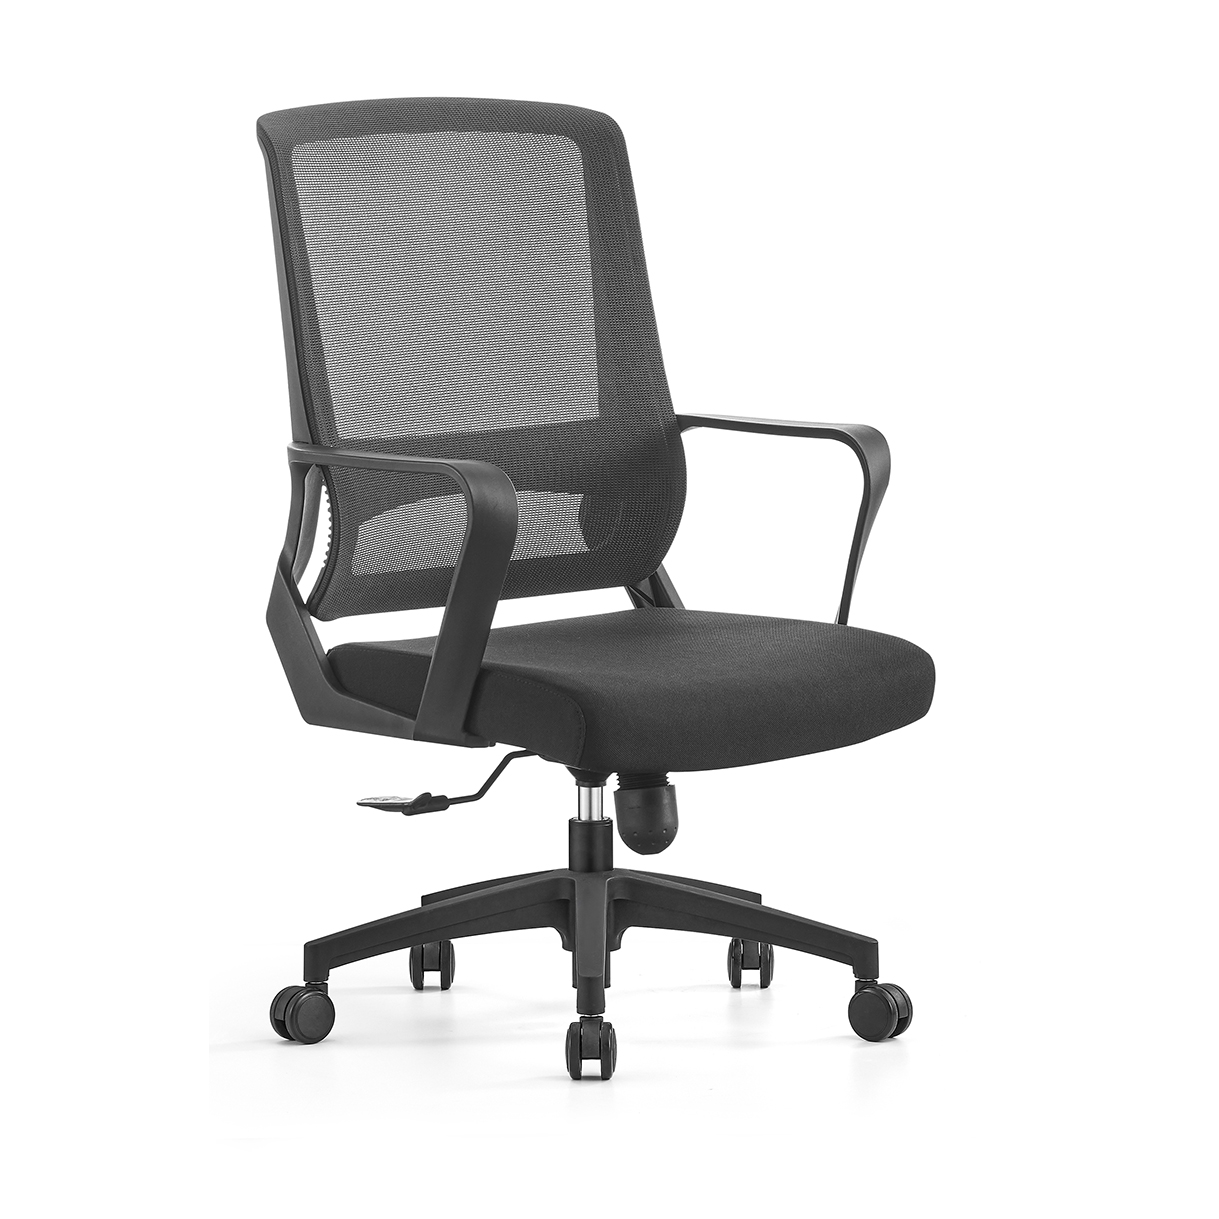 Stylish Armless Office Chairs for a Modern Work Environment